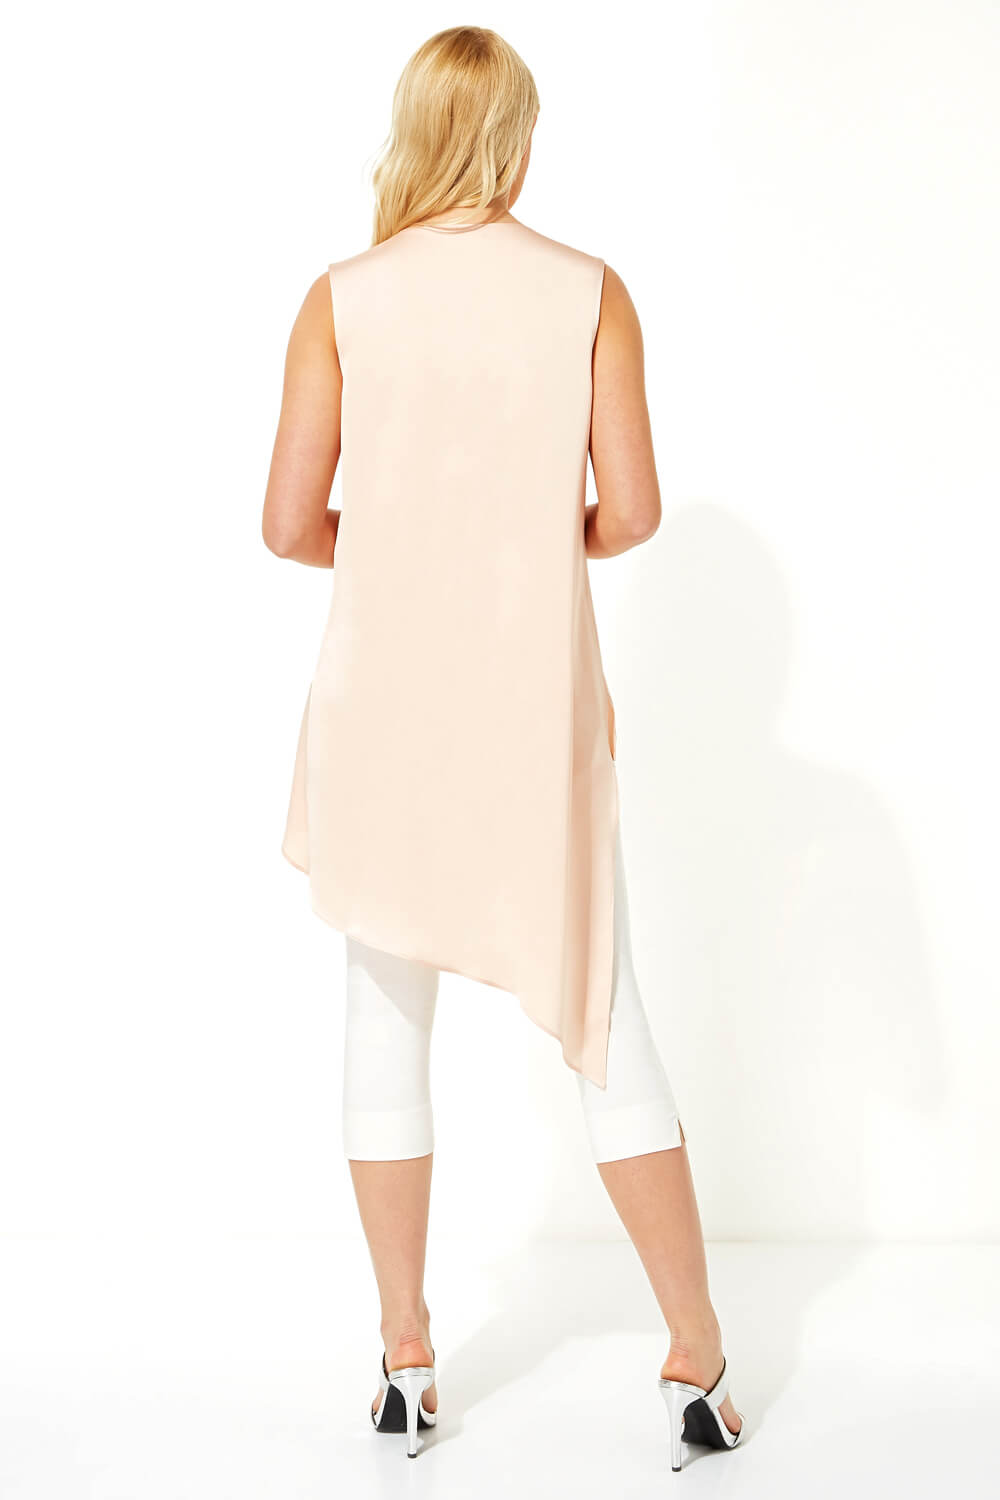 Light Pink Sleeveless Asymmetric Necklace Top , Image 2 of 7